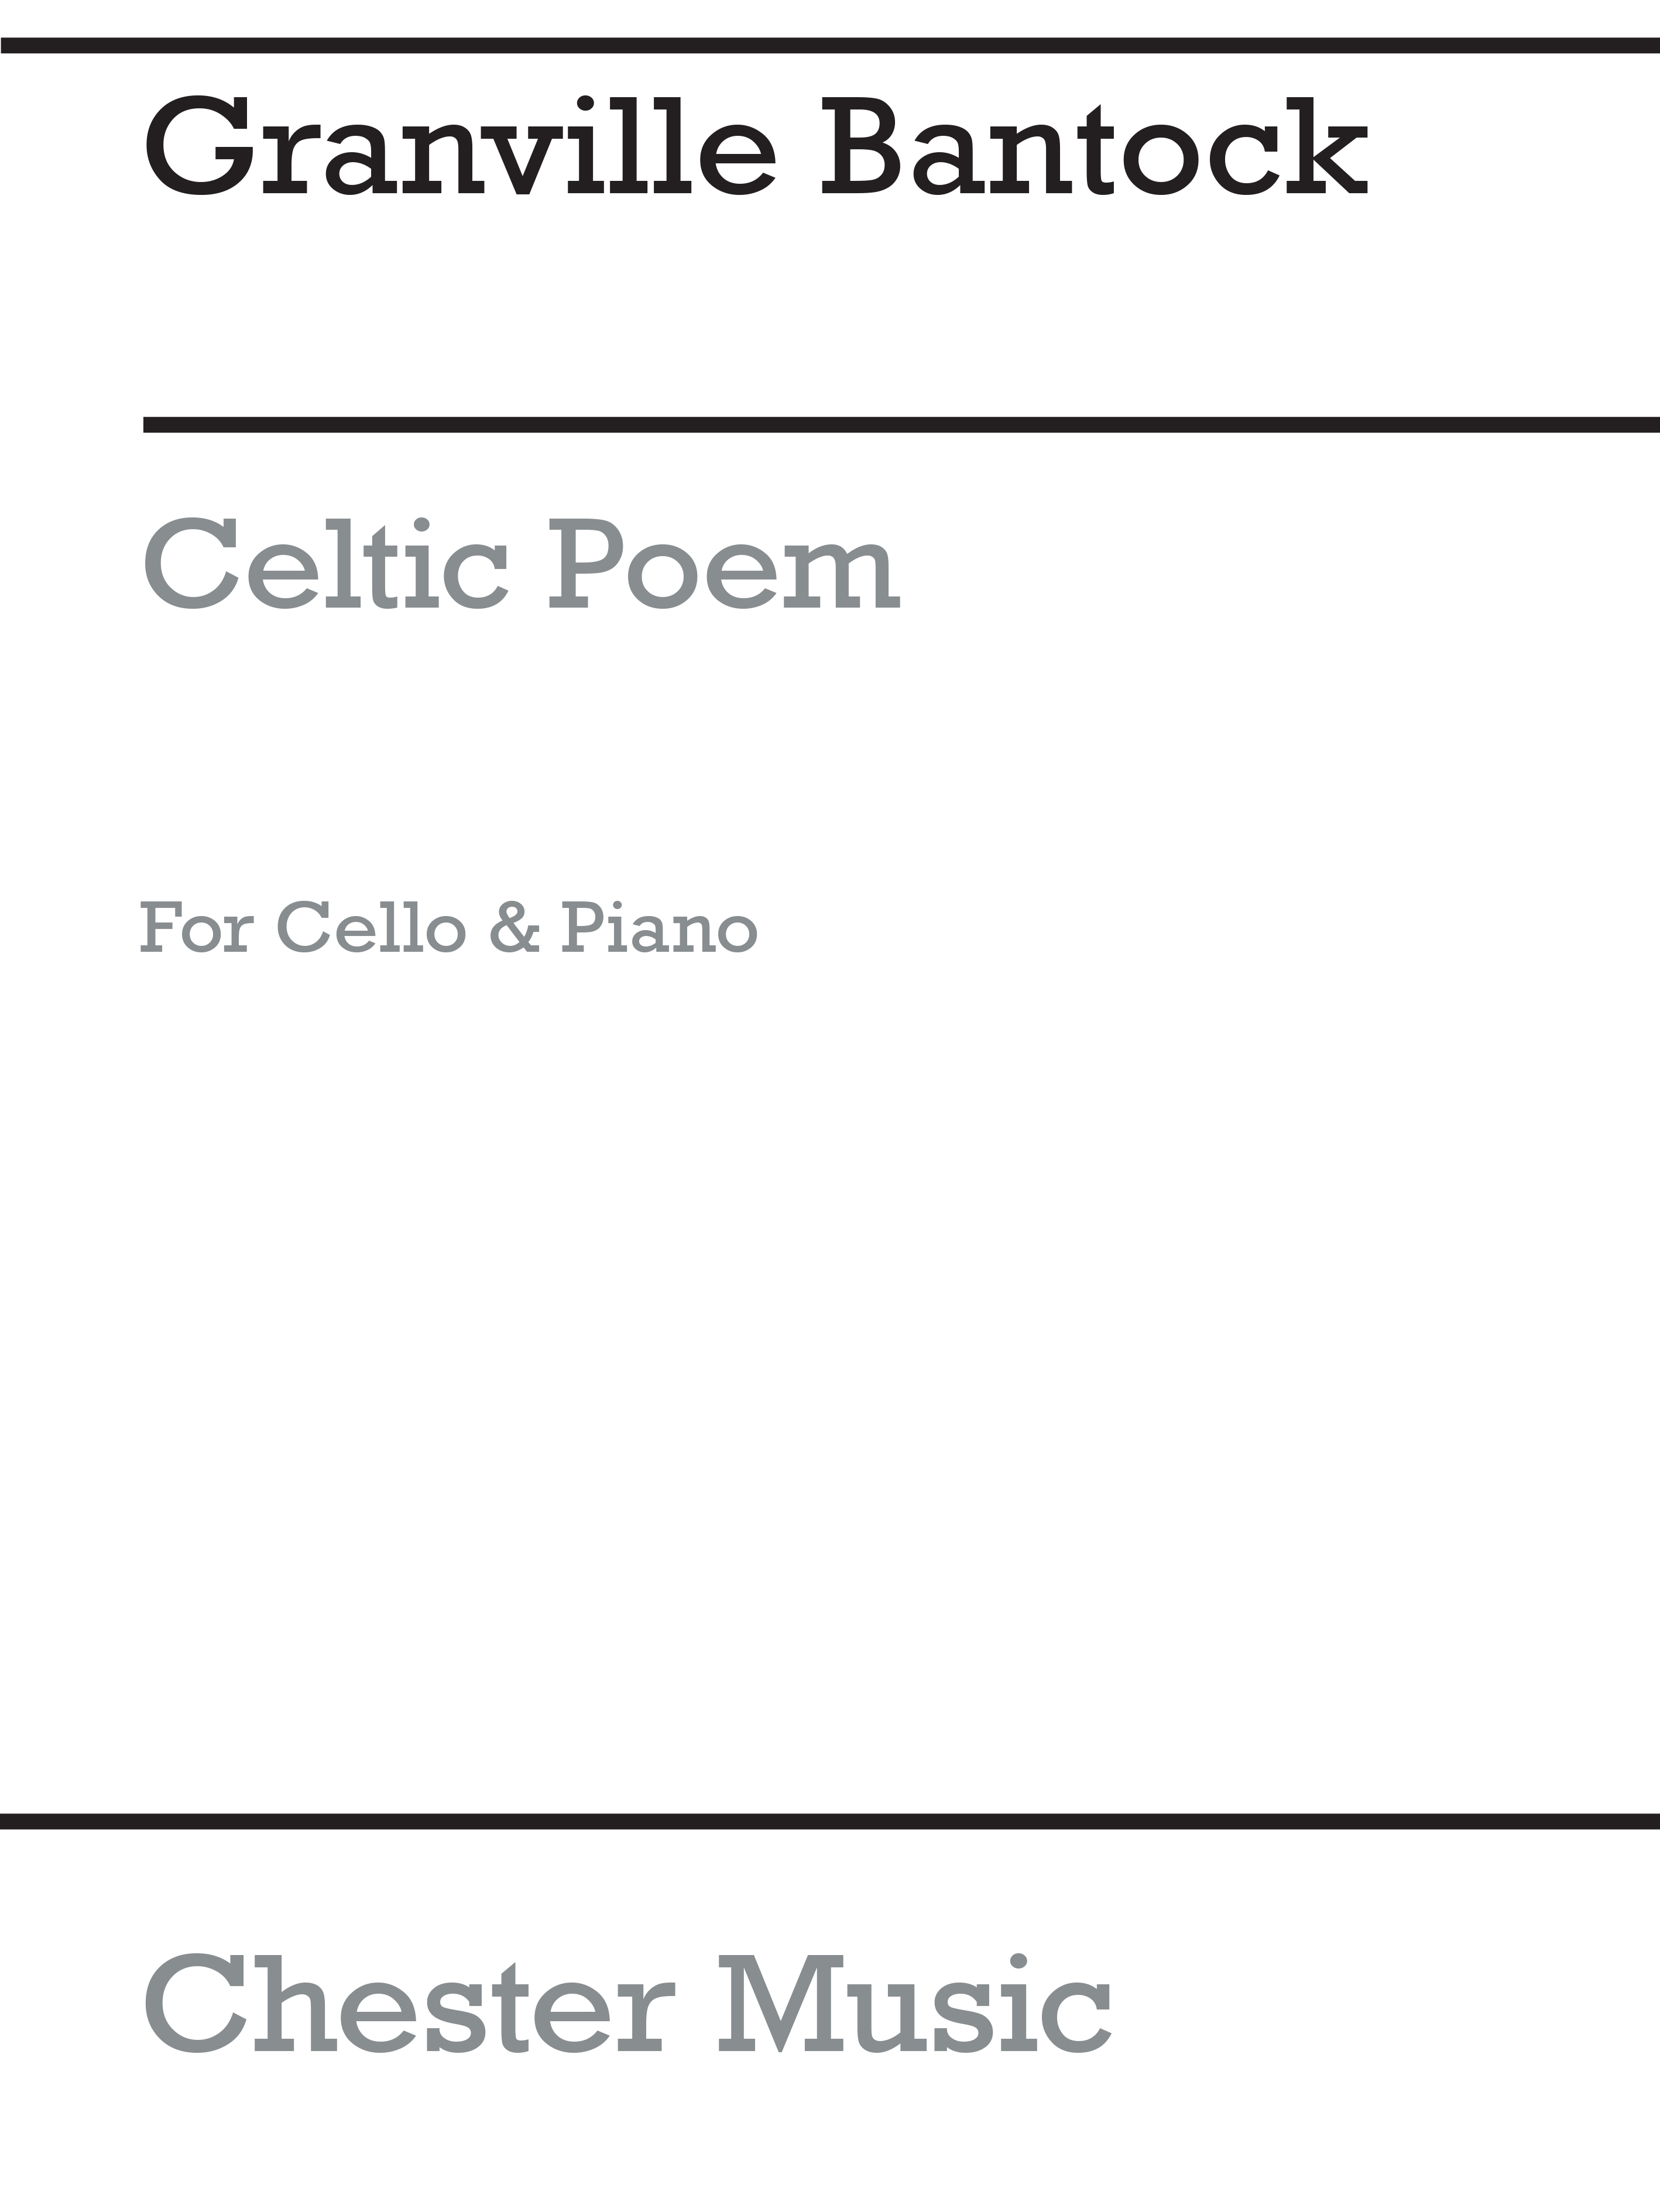 Granville Bantock: Celtic Poem 'The Land of the Ever Young': Cello